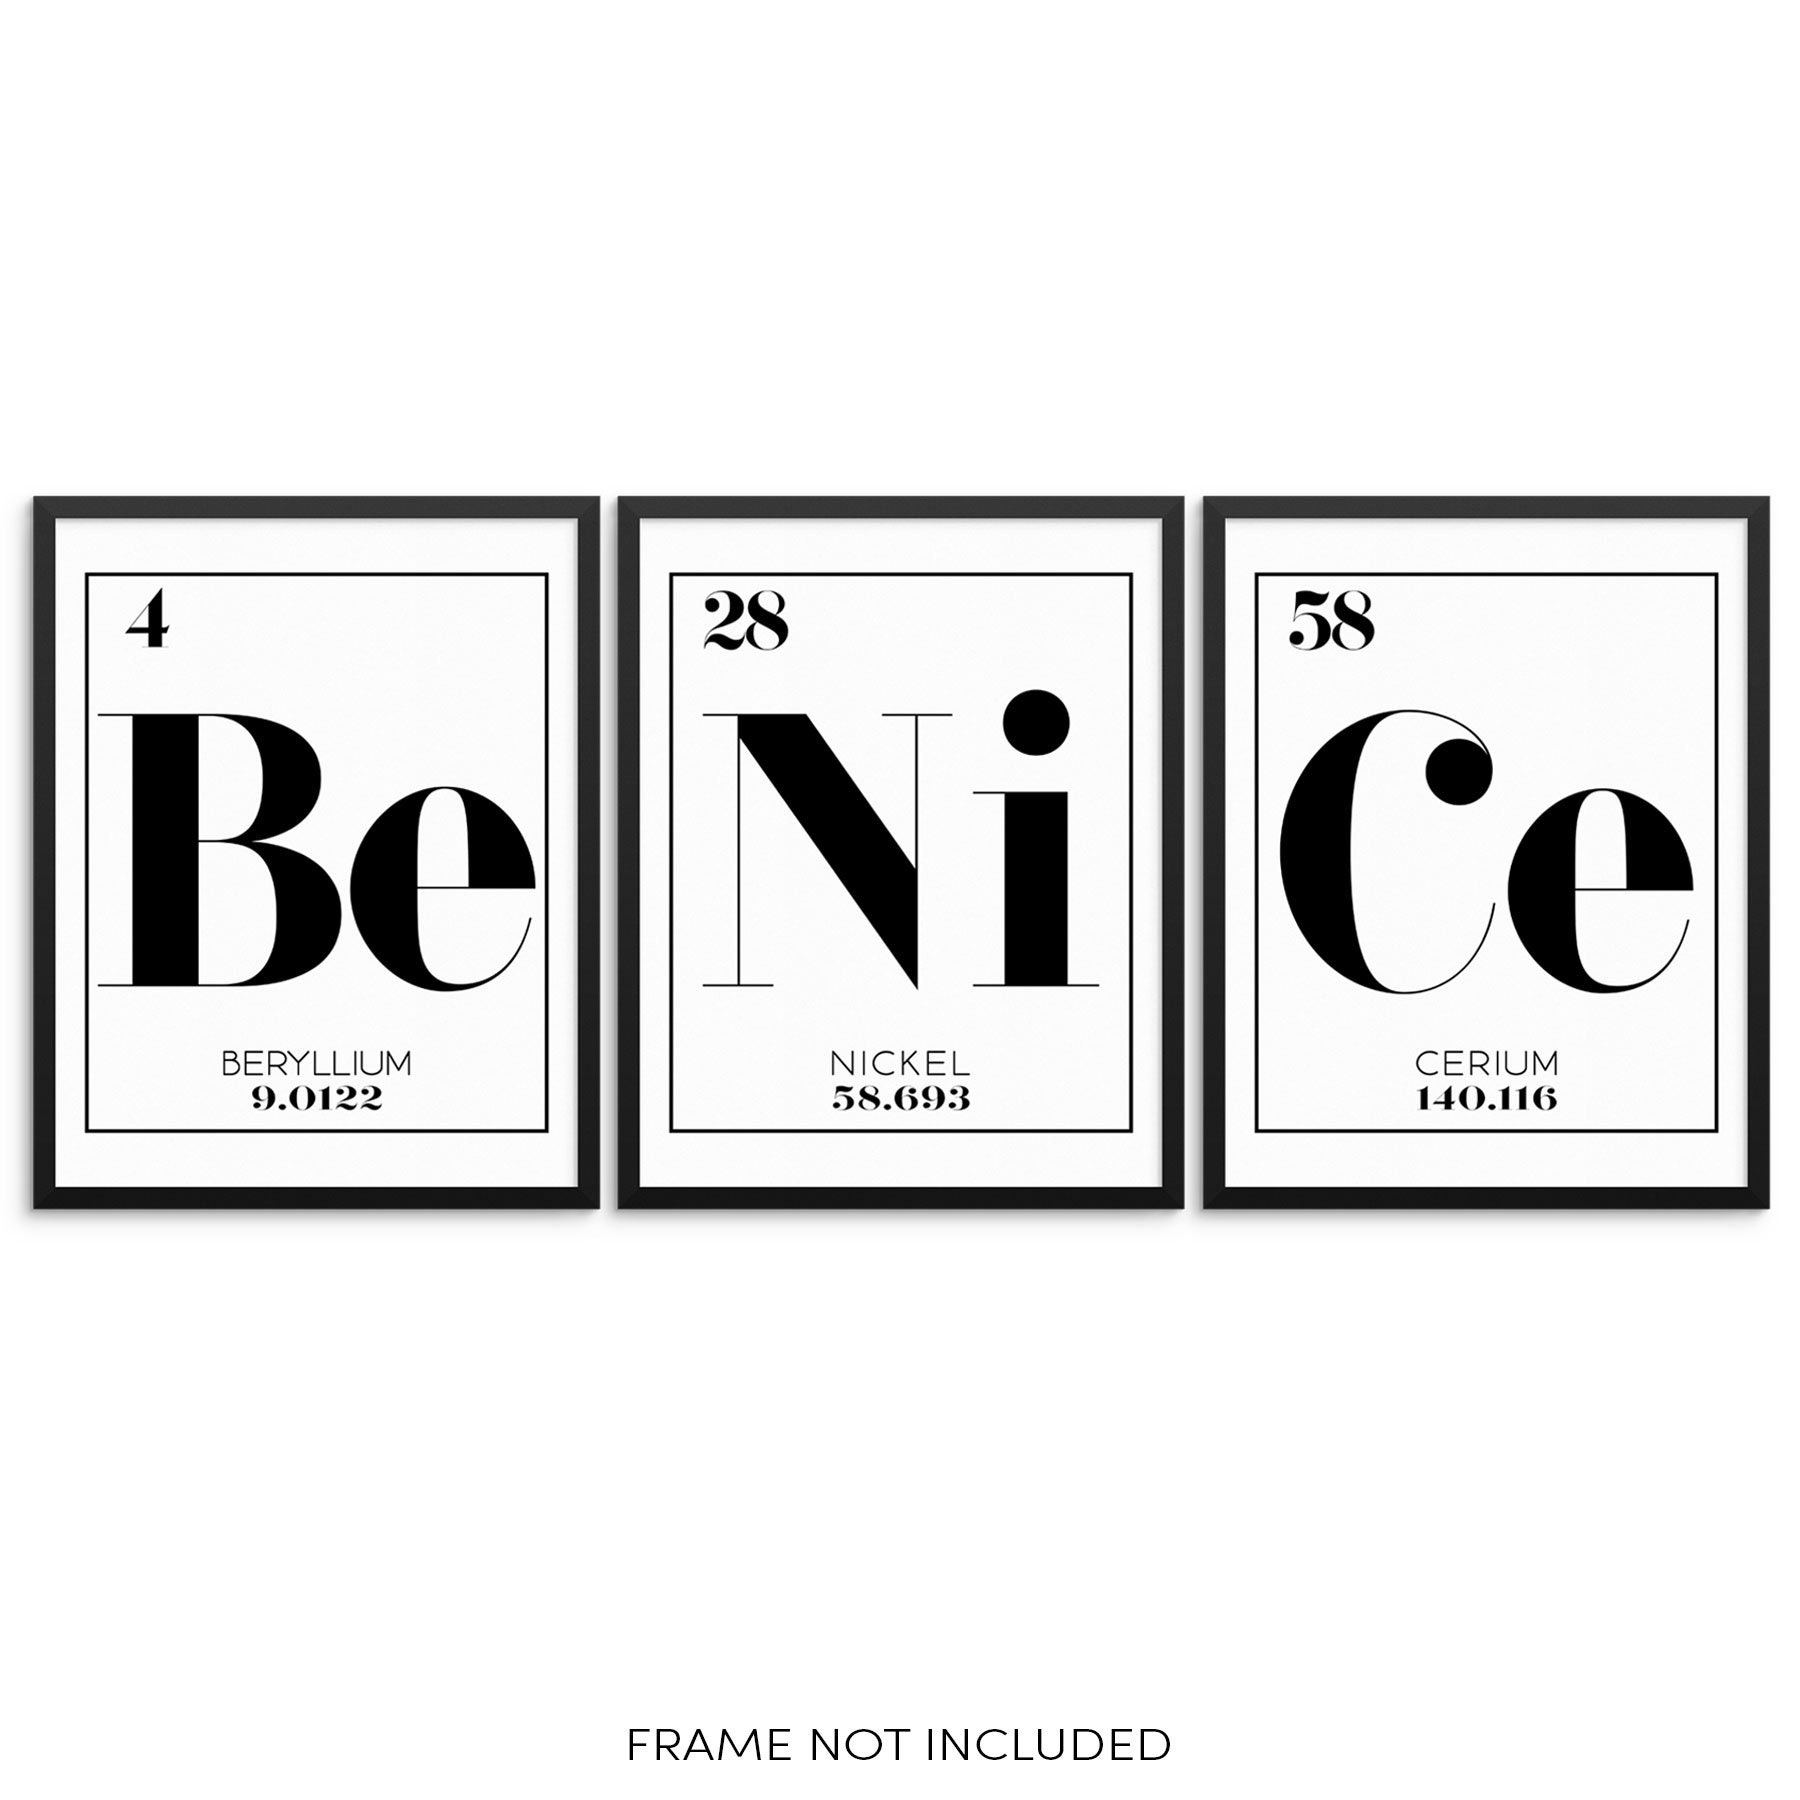 Glamorous elements: A gallery of the periodic table's most beautiful substances